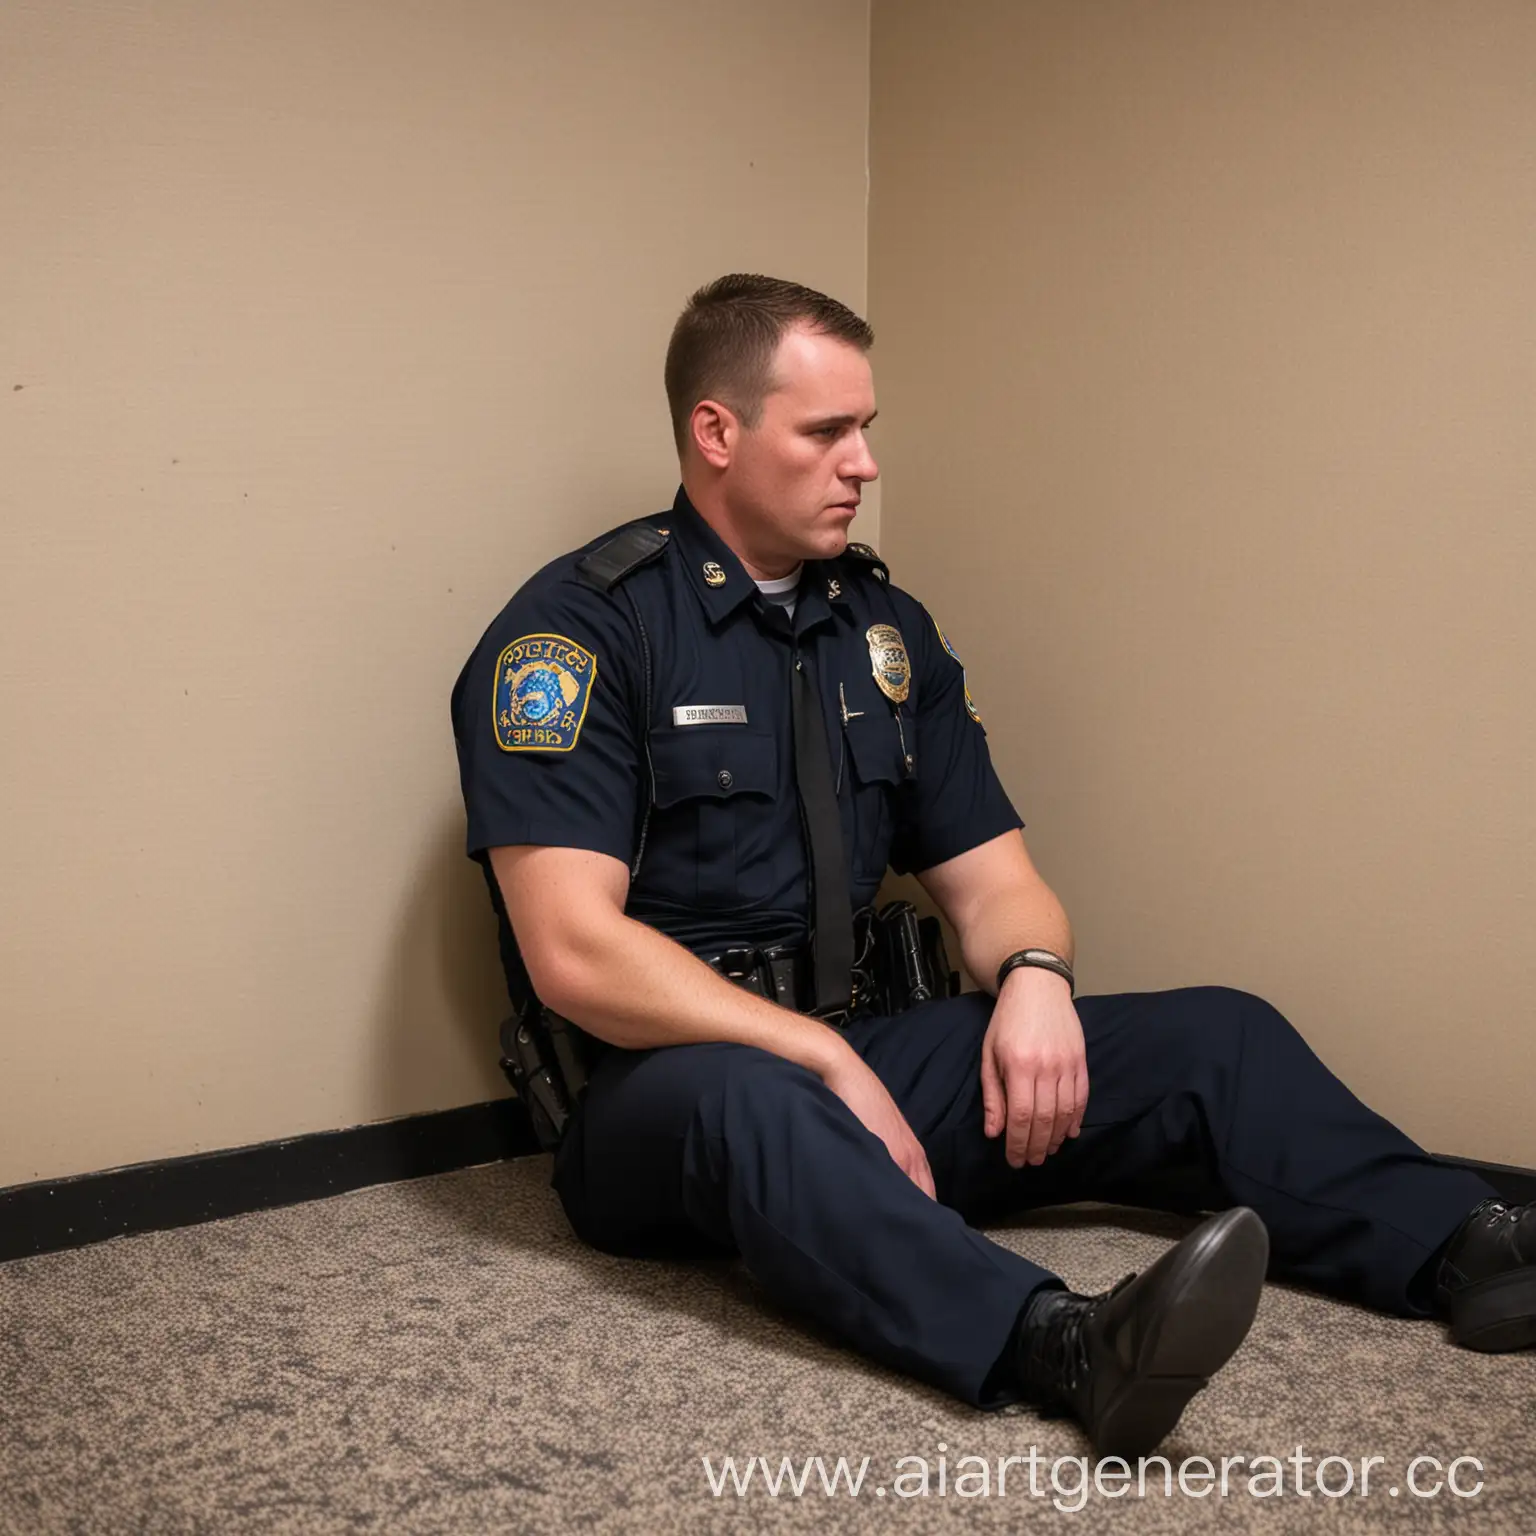 USA-Police-Officer-Sitting-on-Floor-Overcome-with-Grief